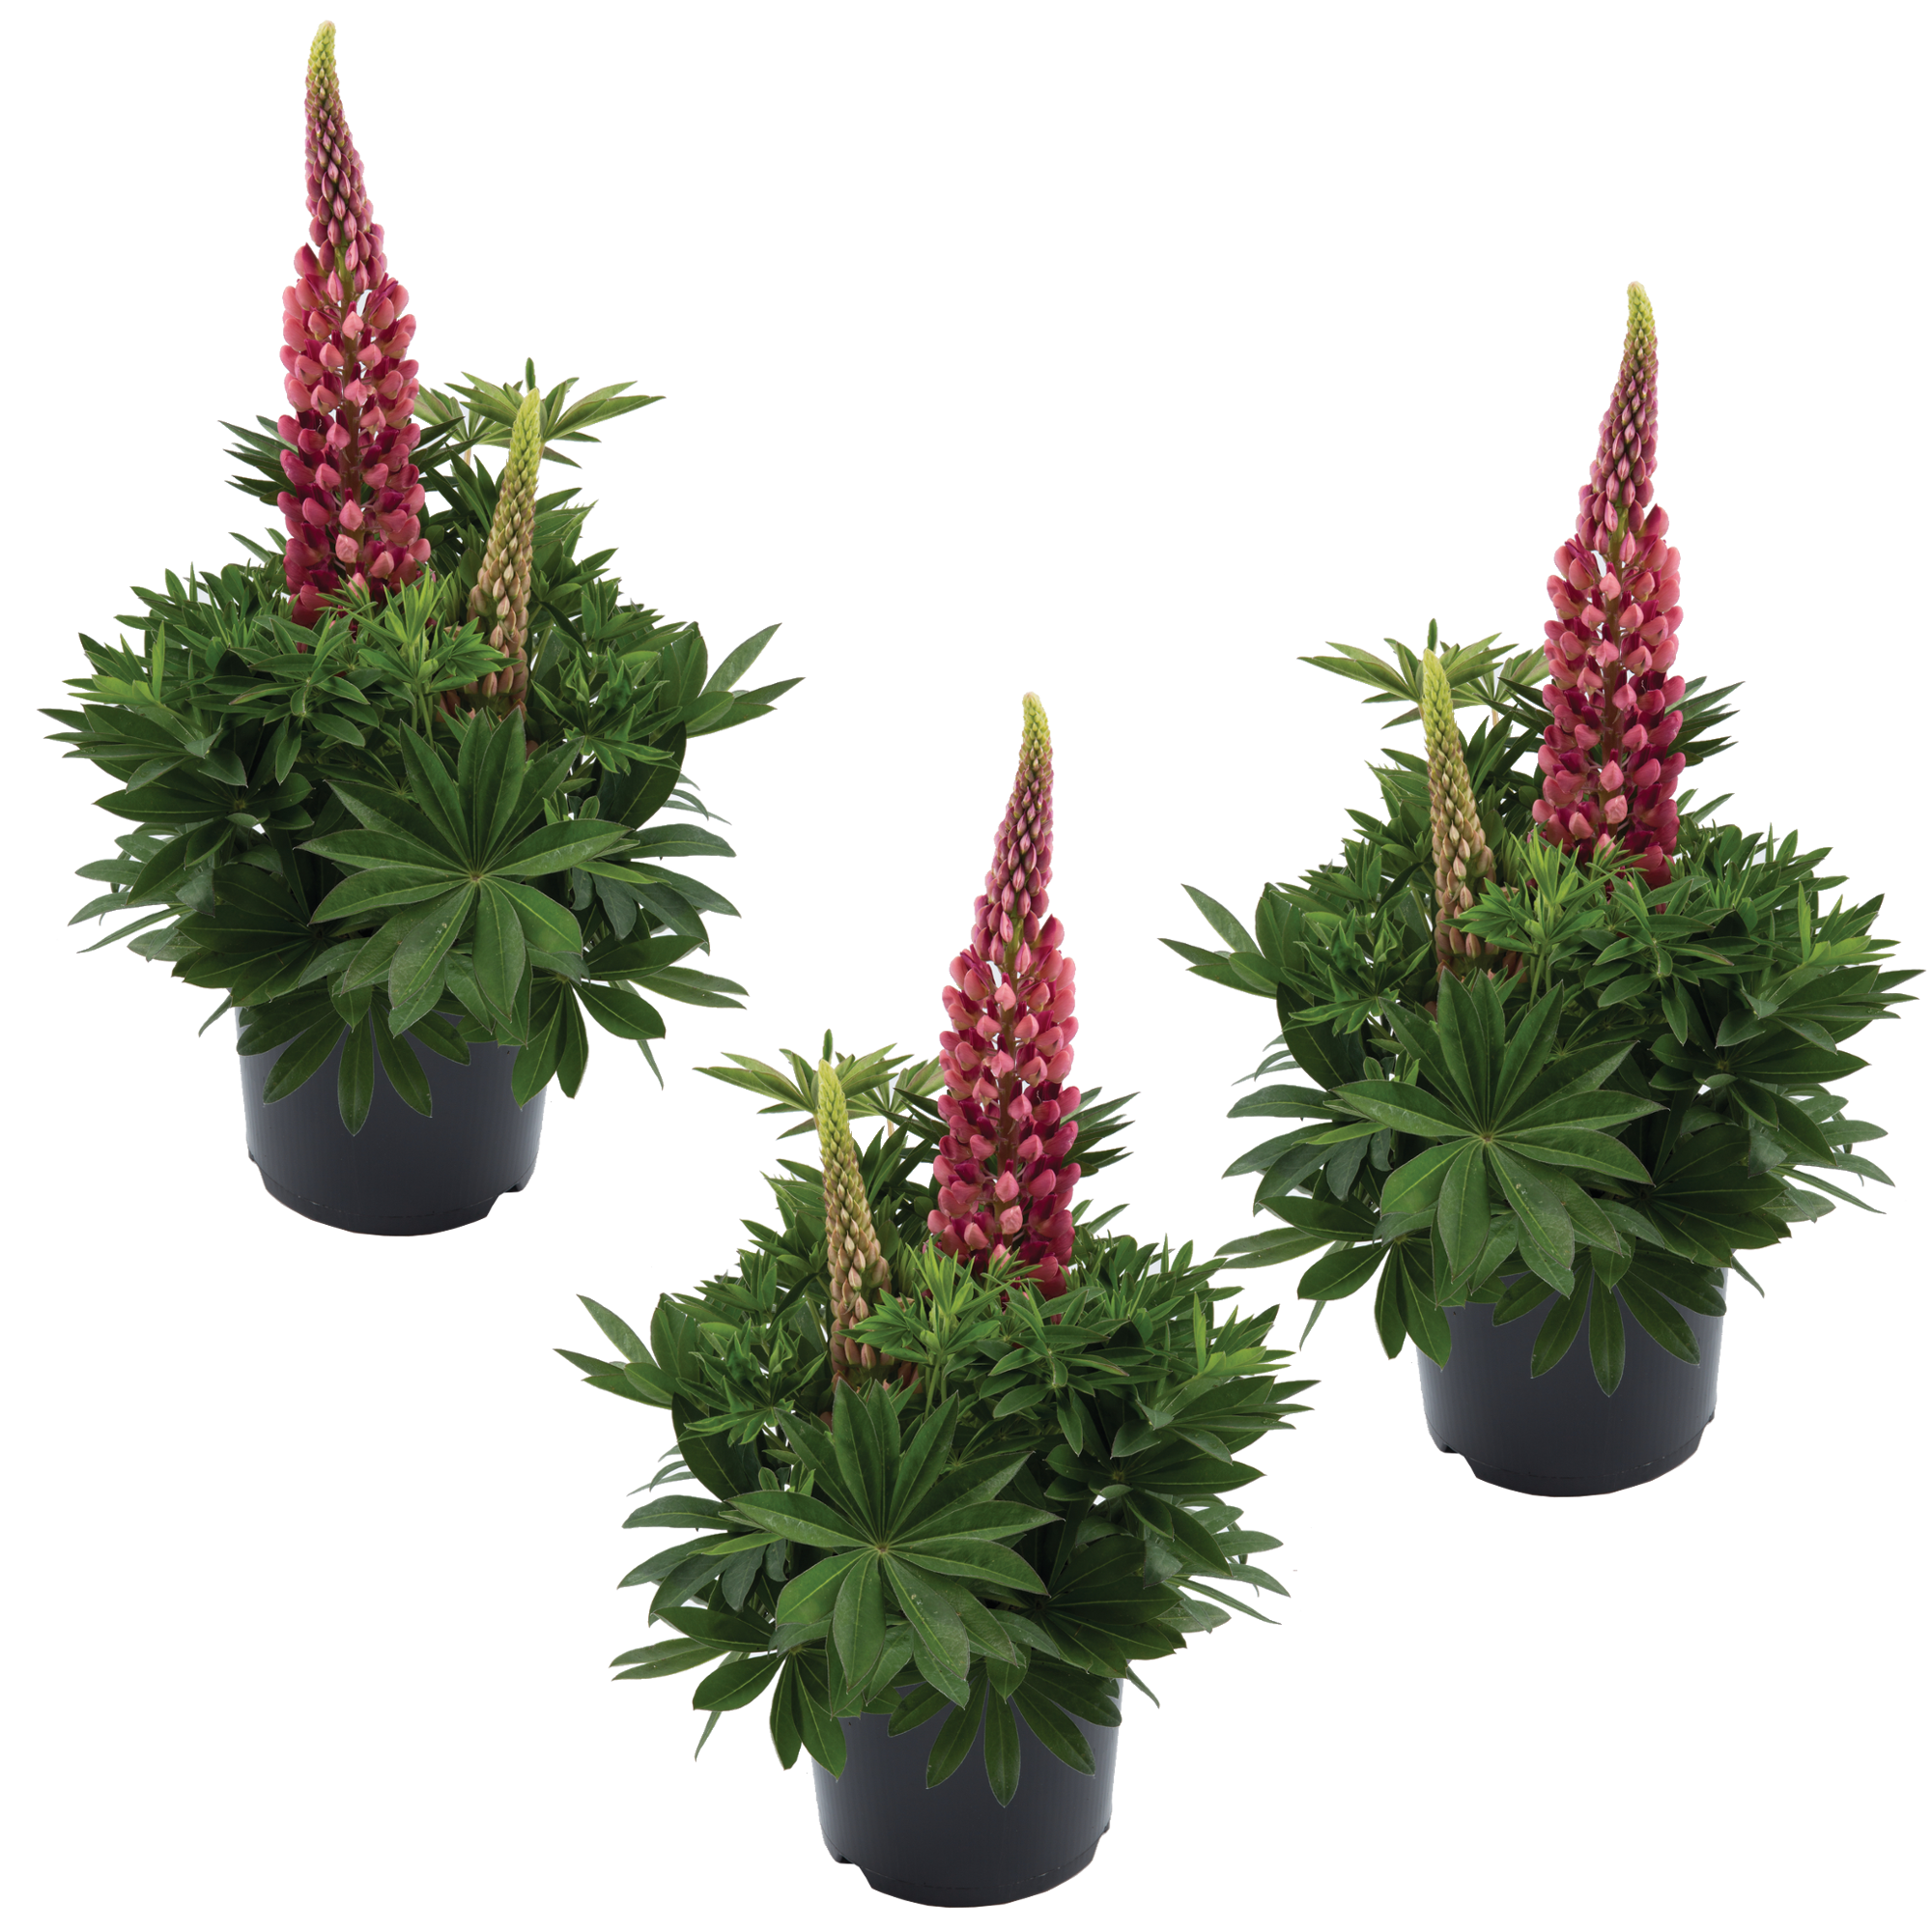 Lupine 'Gallery Red Shades' rot 11 cm Topf, 3er-Set + product picture